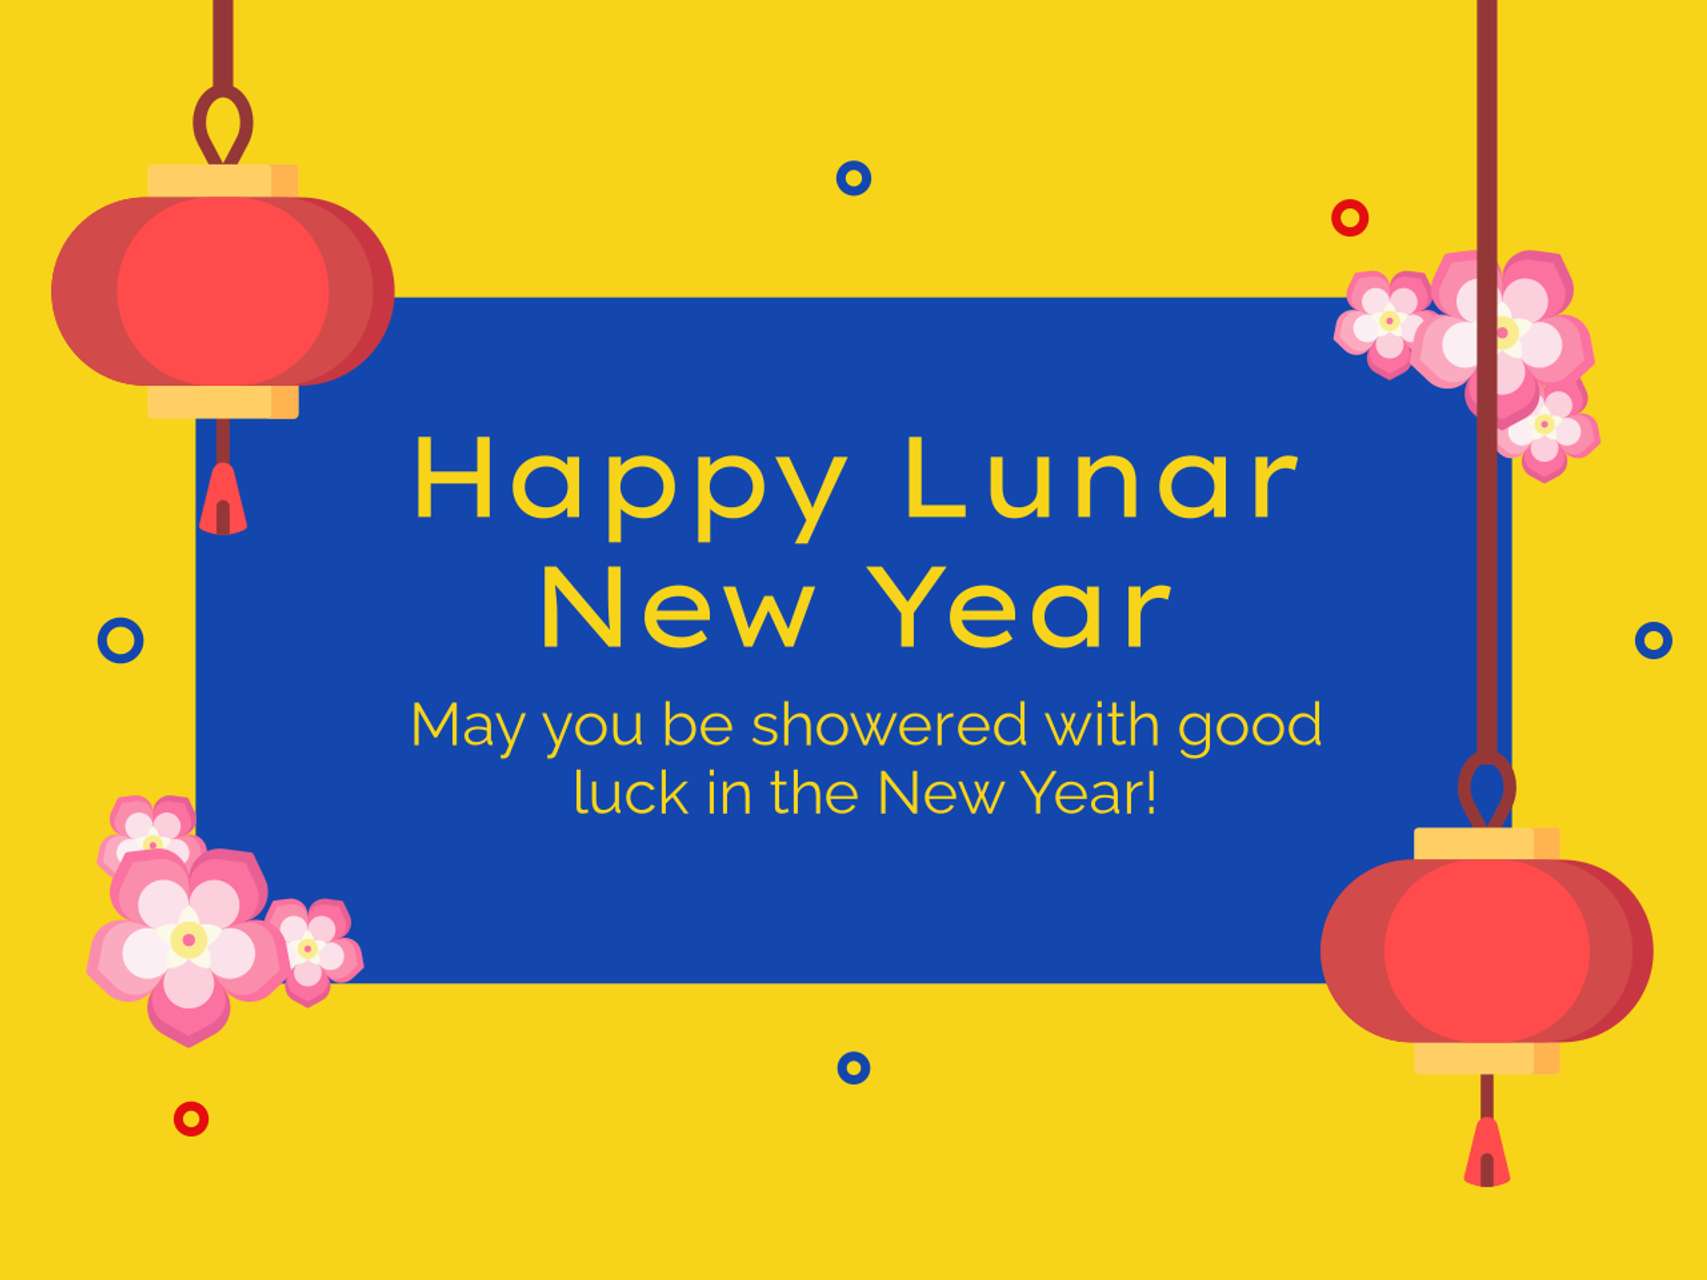 Chinese New Year Templates Pack